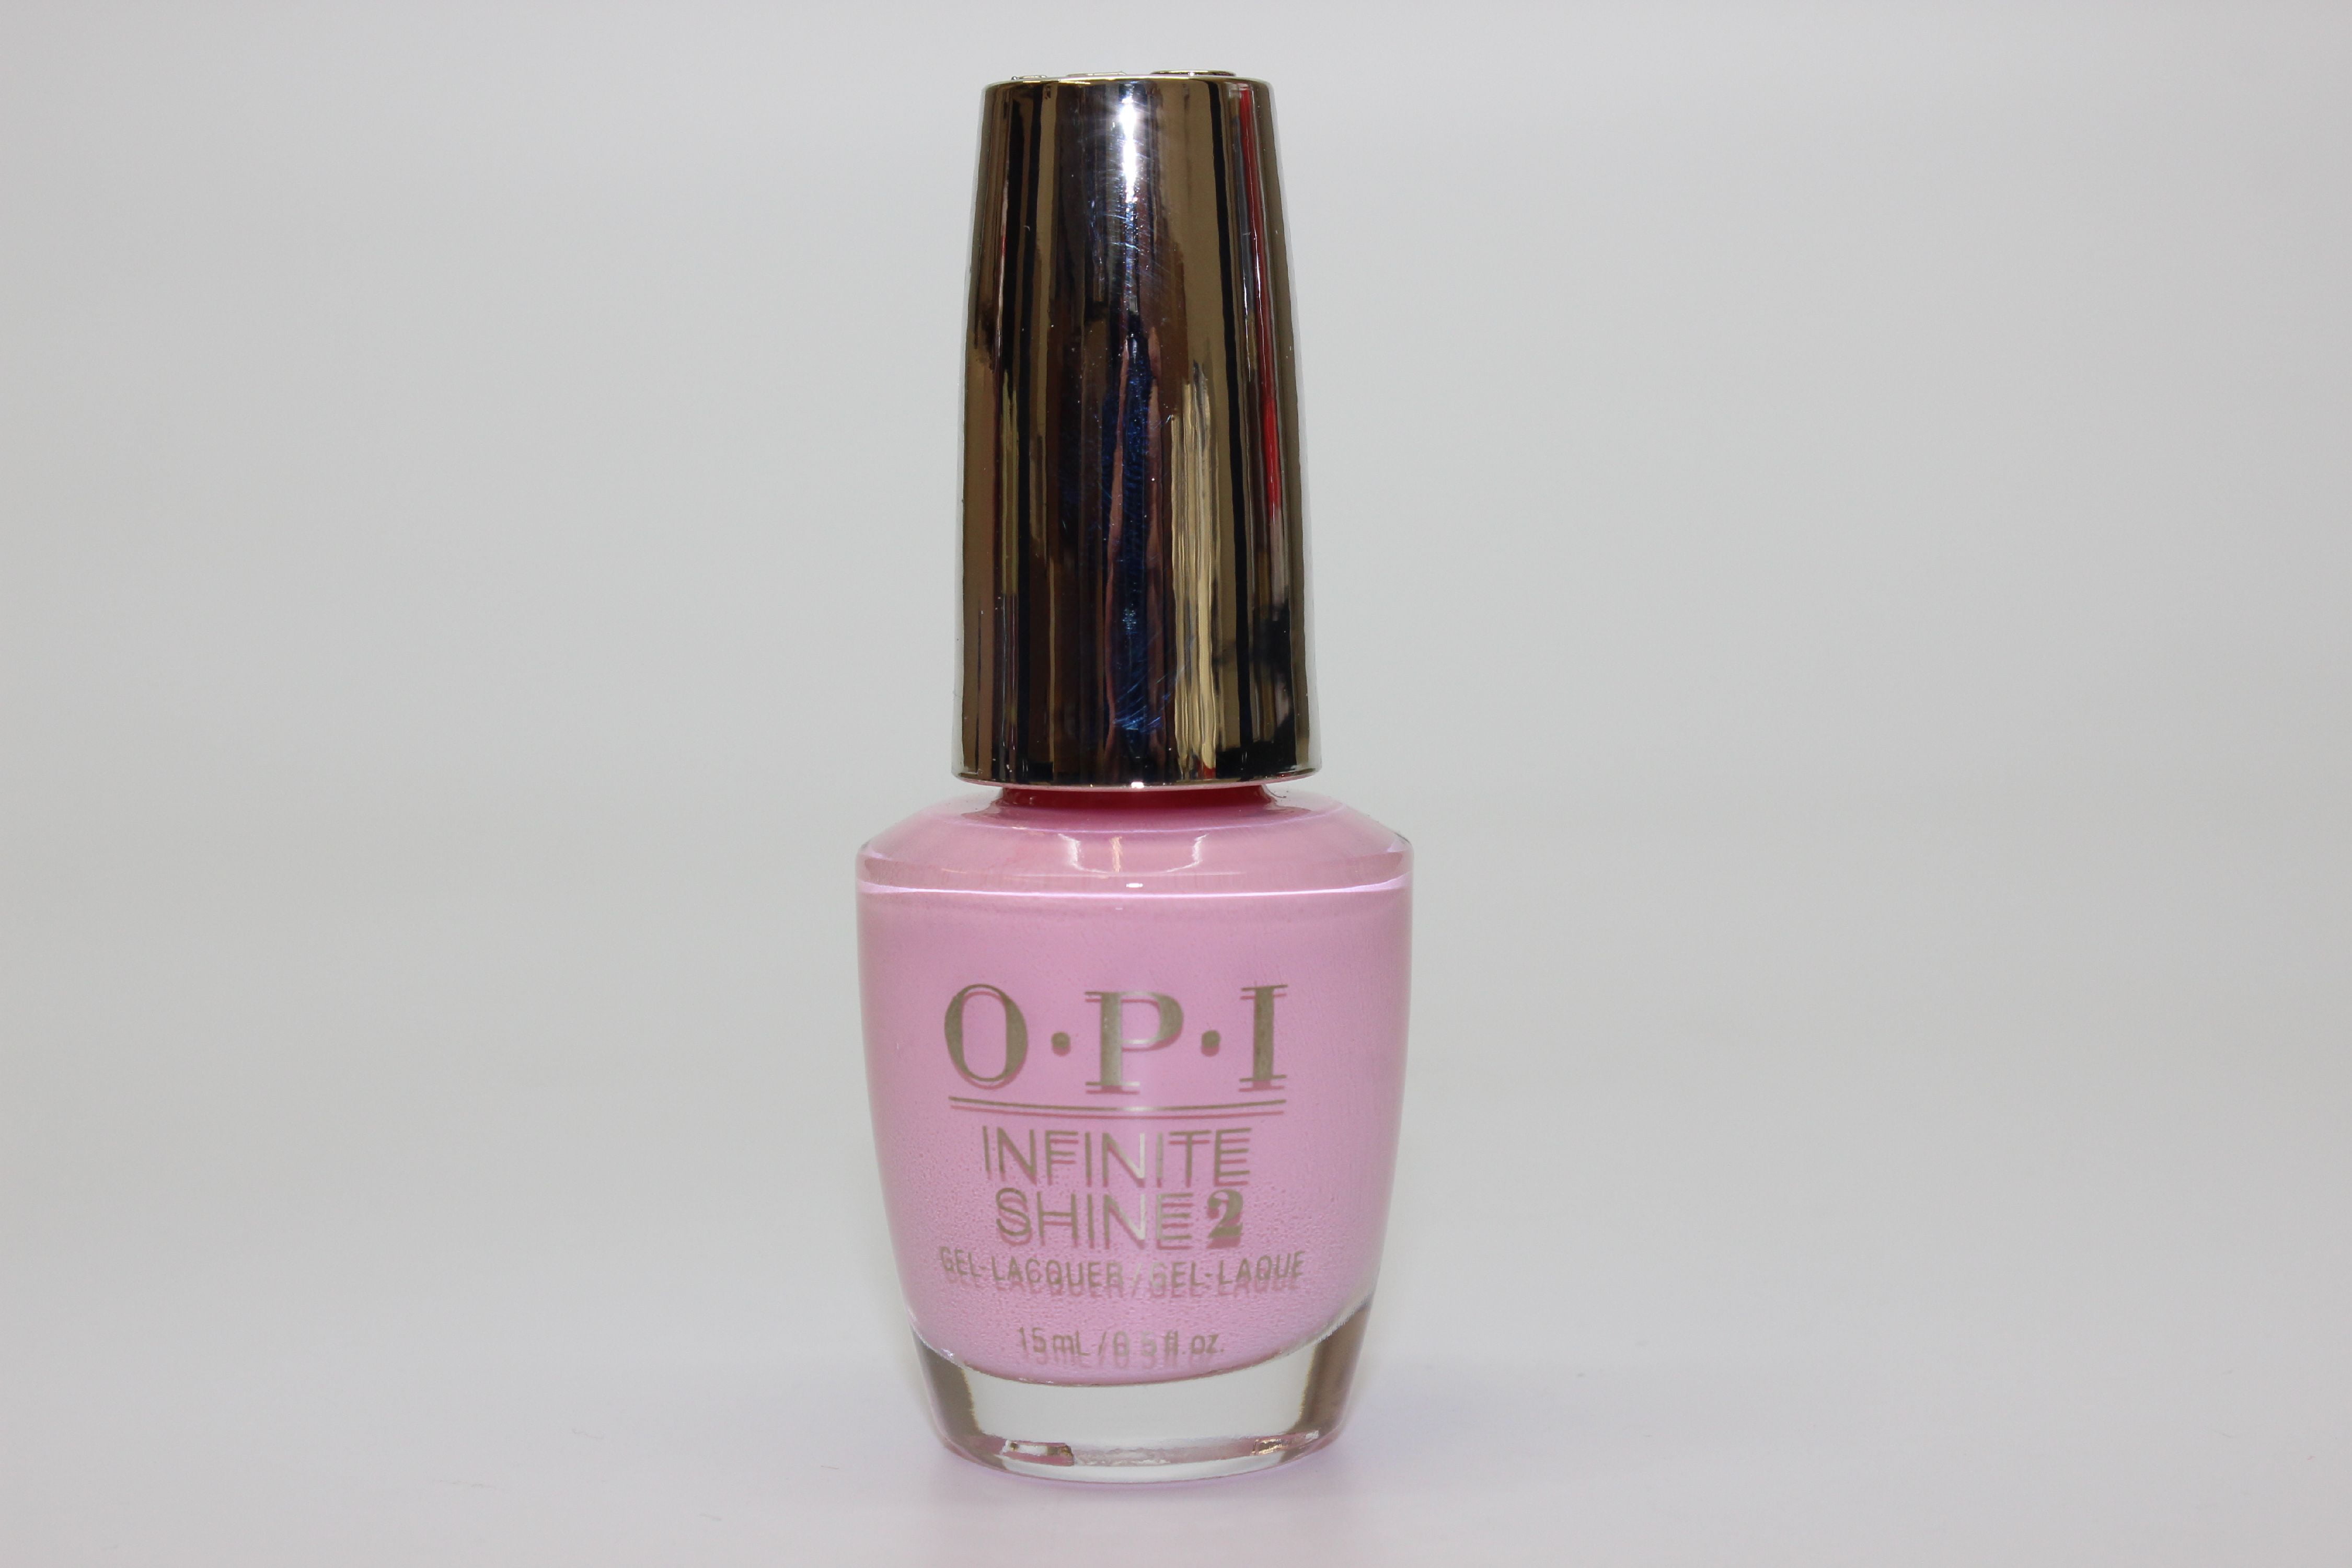 7. OPI "Mod About You" Nail Polish - wide 1